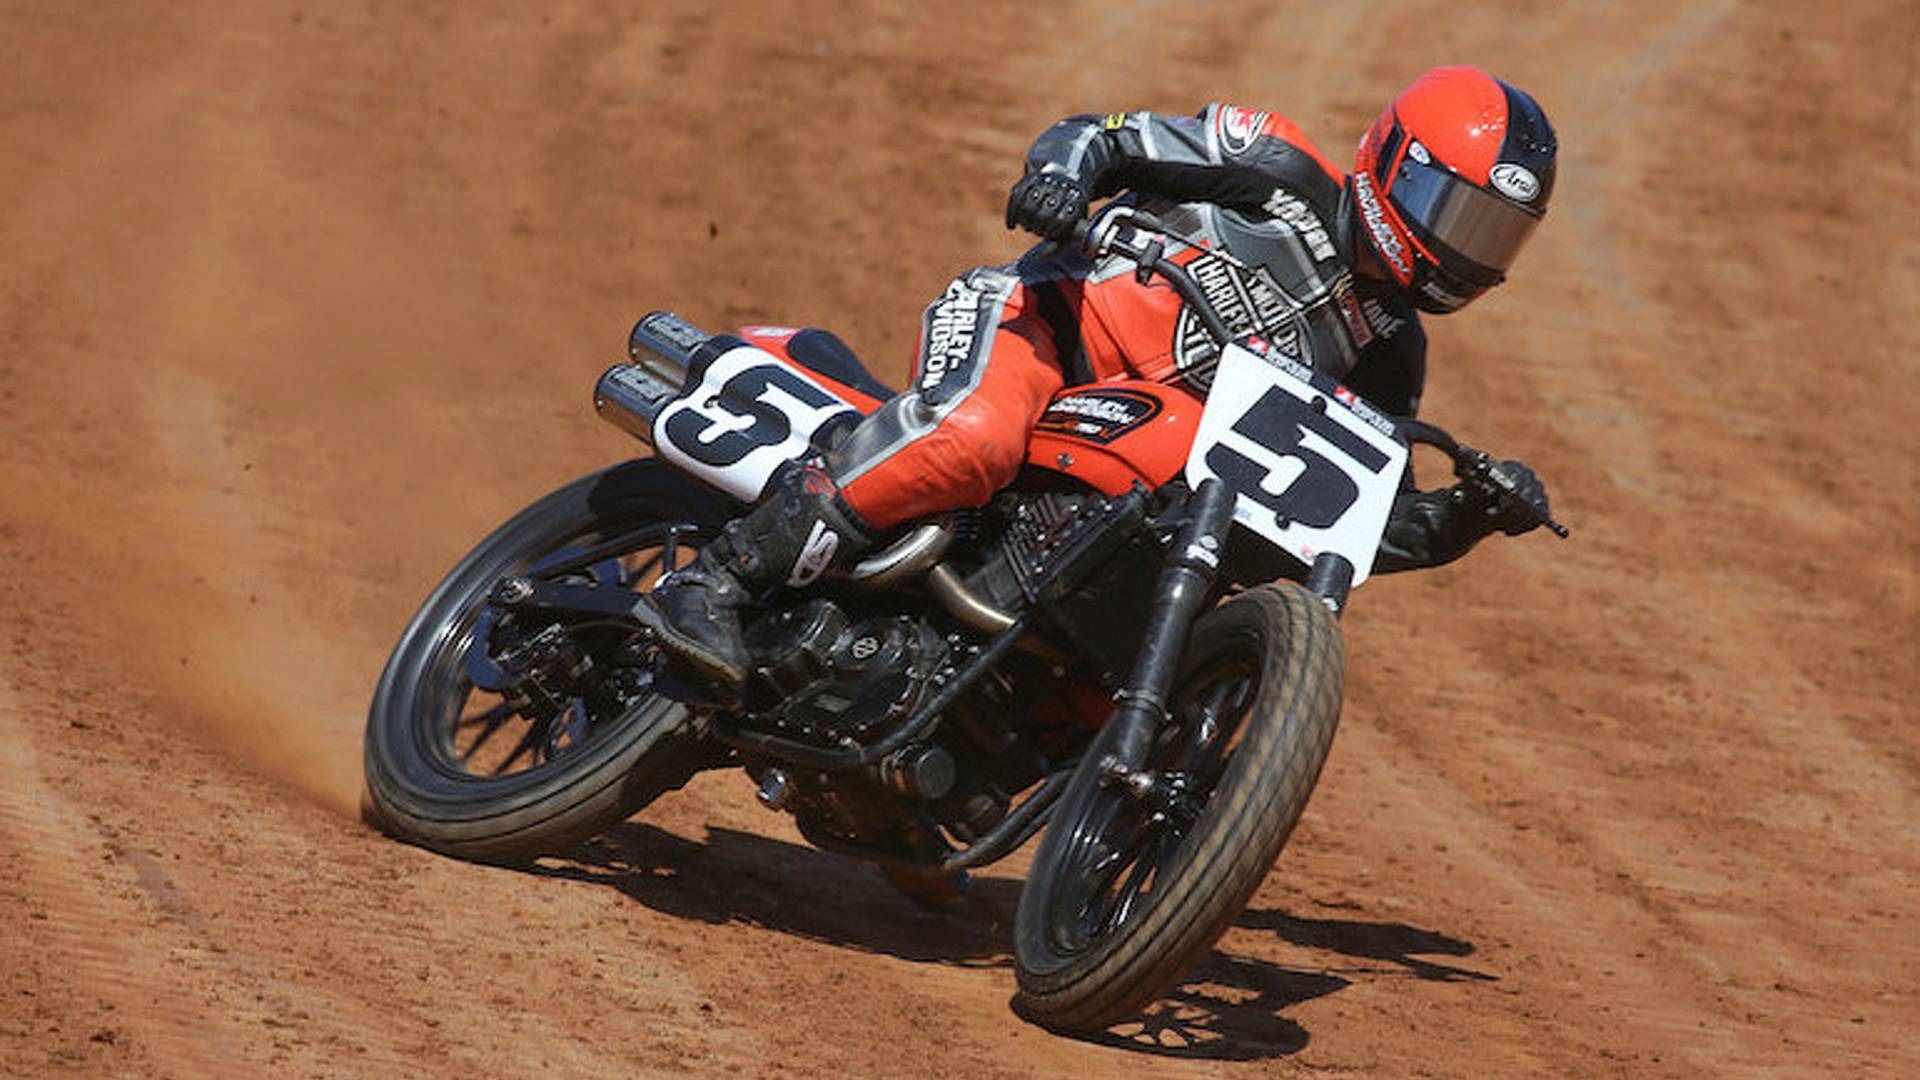 H D's Misguided Half Million Dollar Flat Track Investment